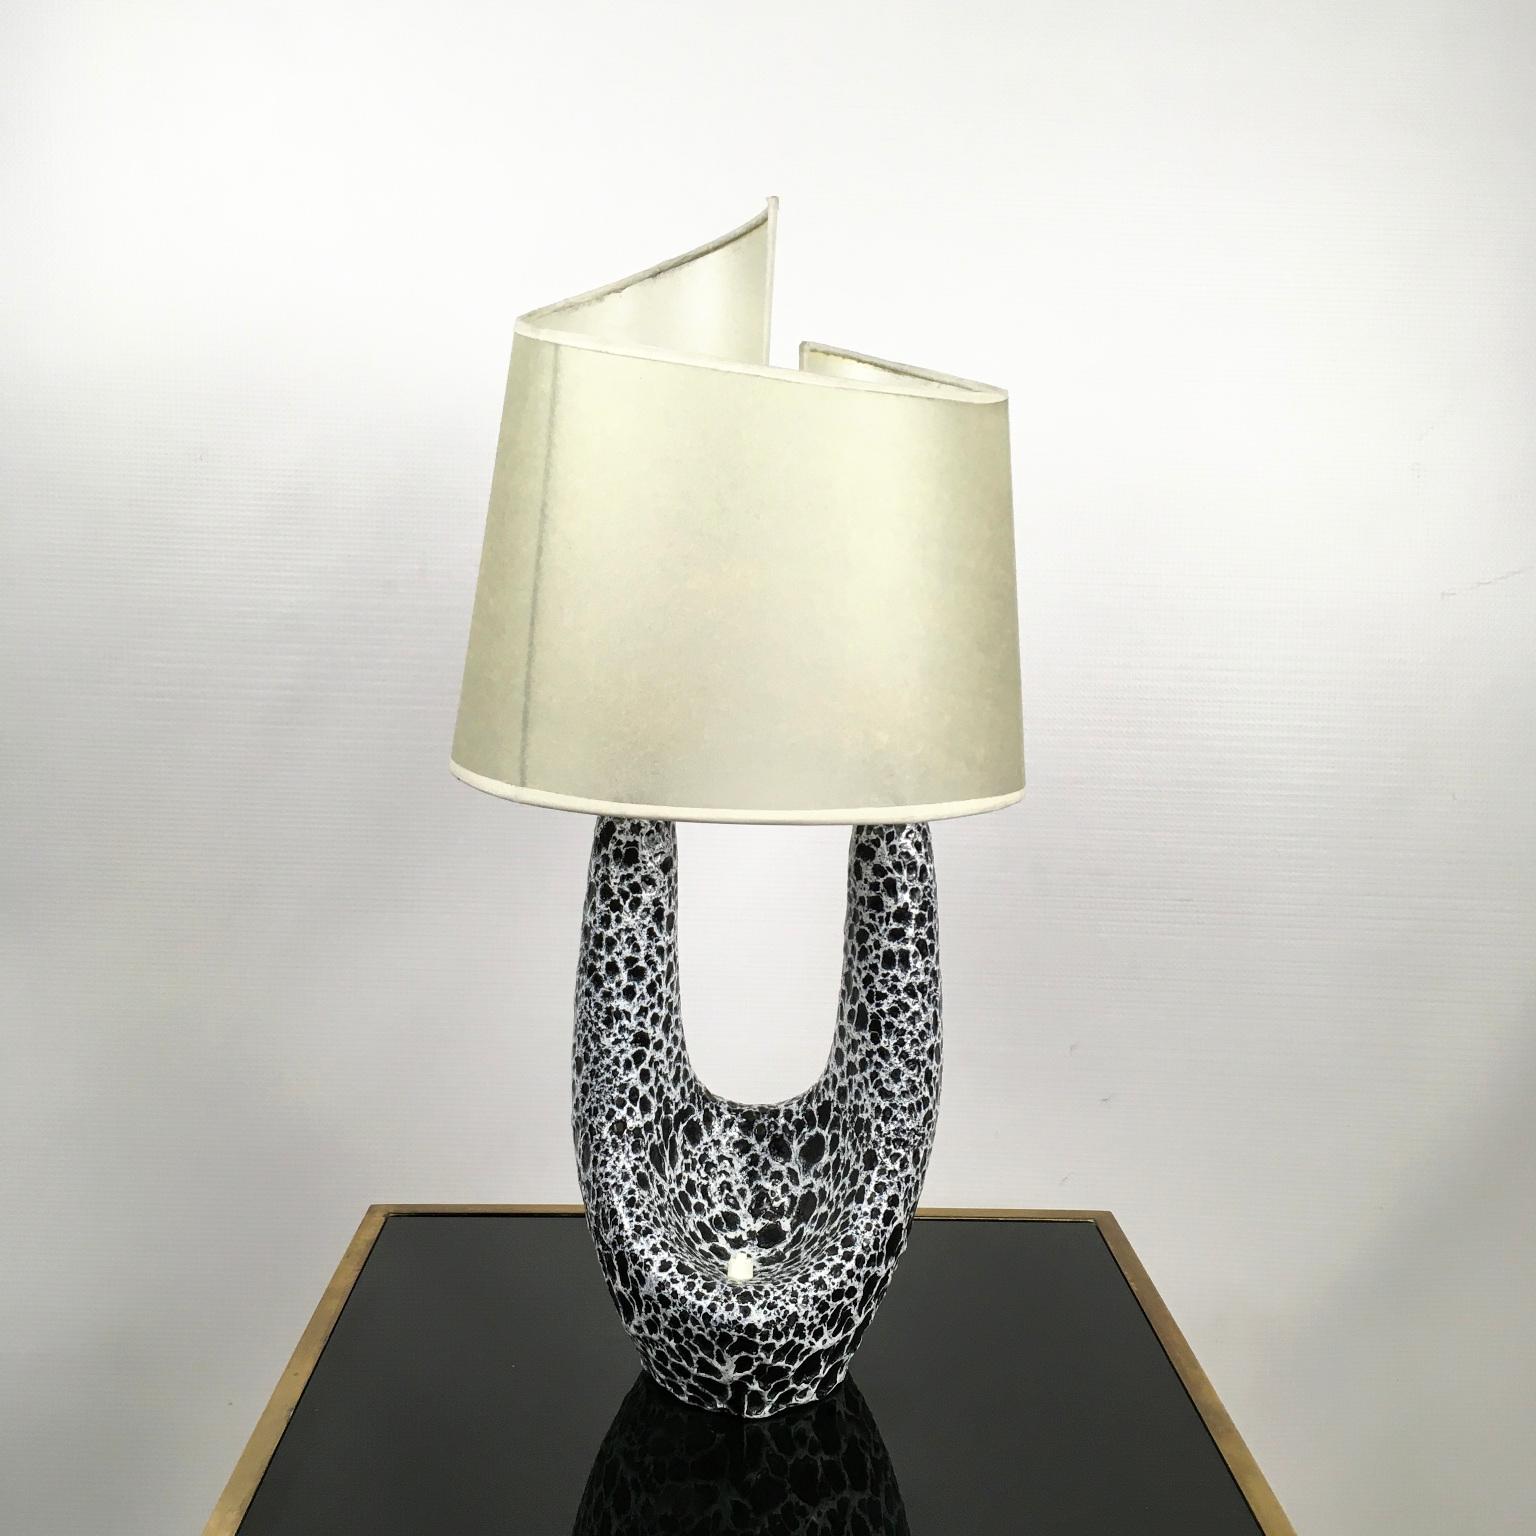 1950s ceramic table lamp by the French Artist Le Vaucour for Vallauris...
Black and white glaze base with its own original lampshade.
 